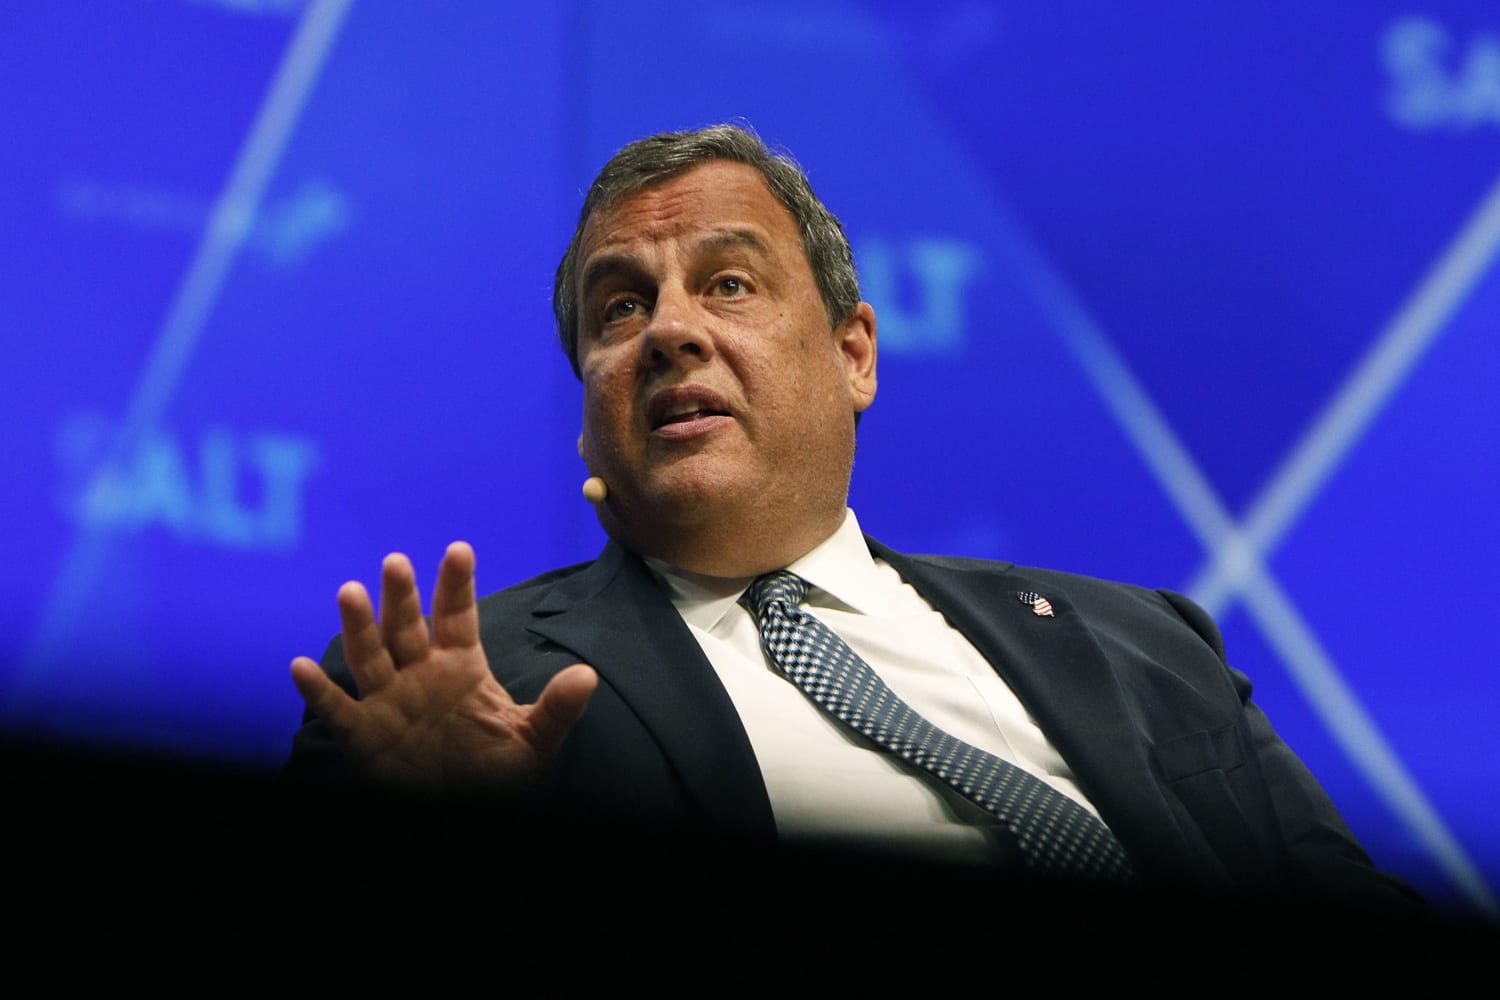 Chris Christie knocks Trump's 2024 bid: 'It's not going to end nicely'